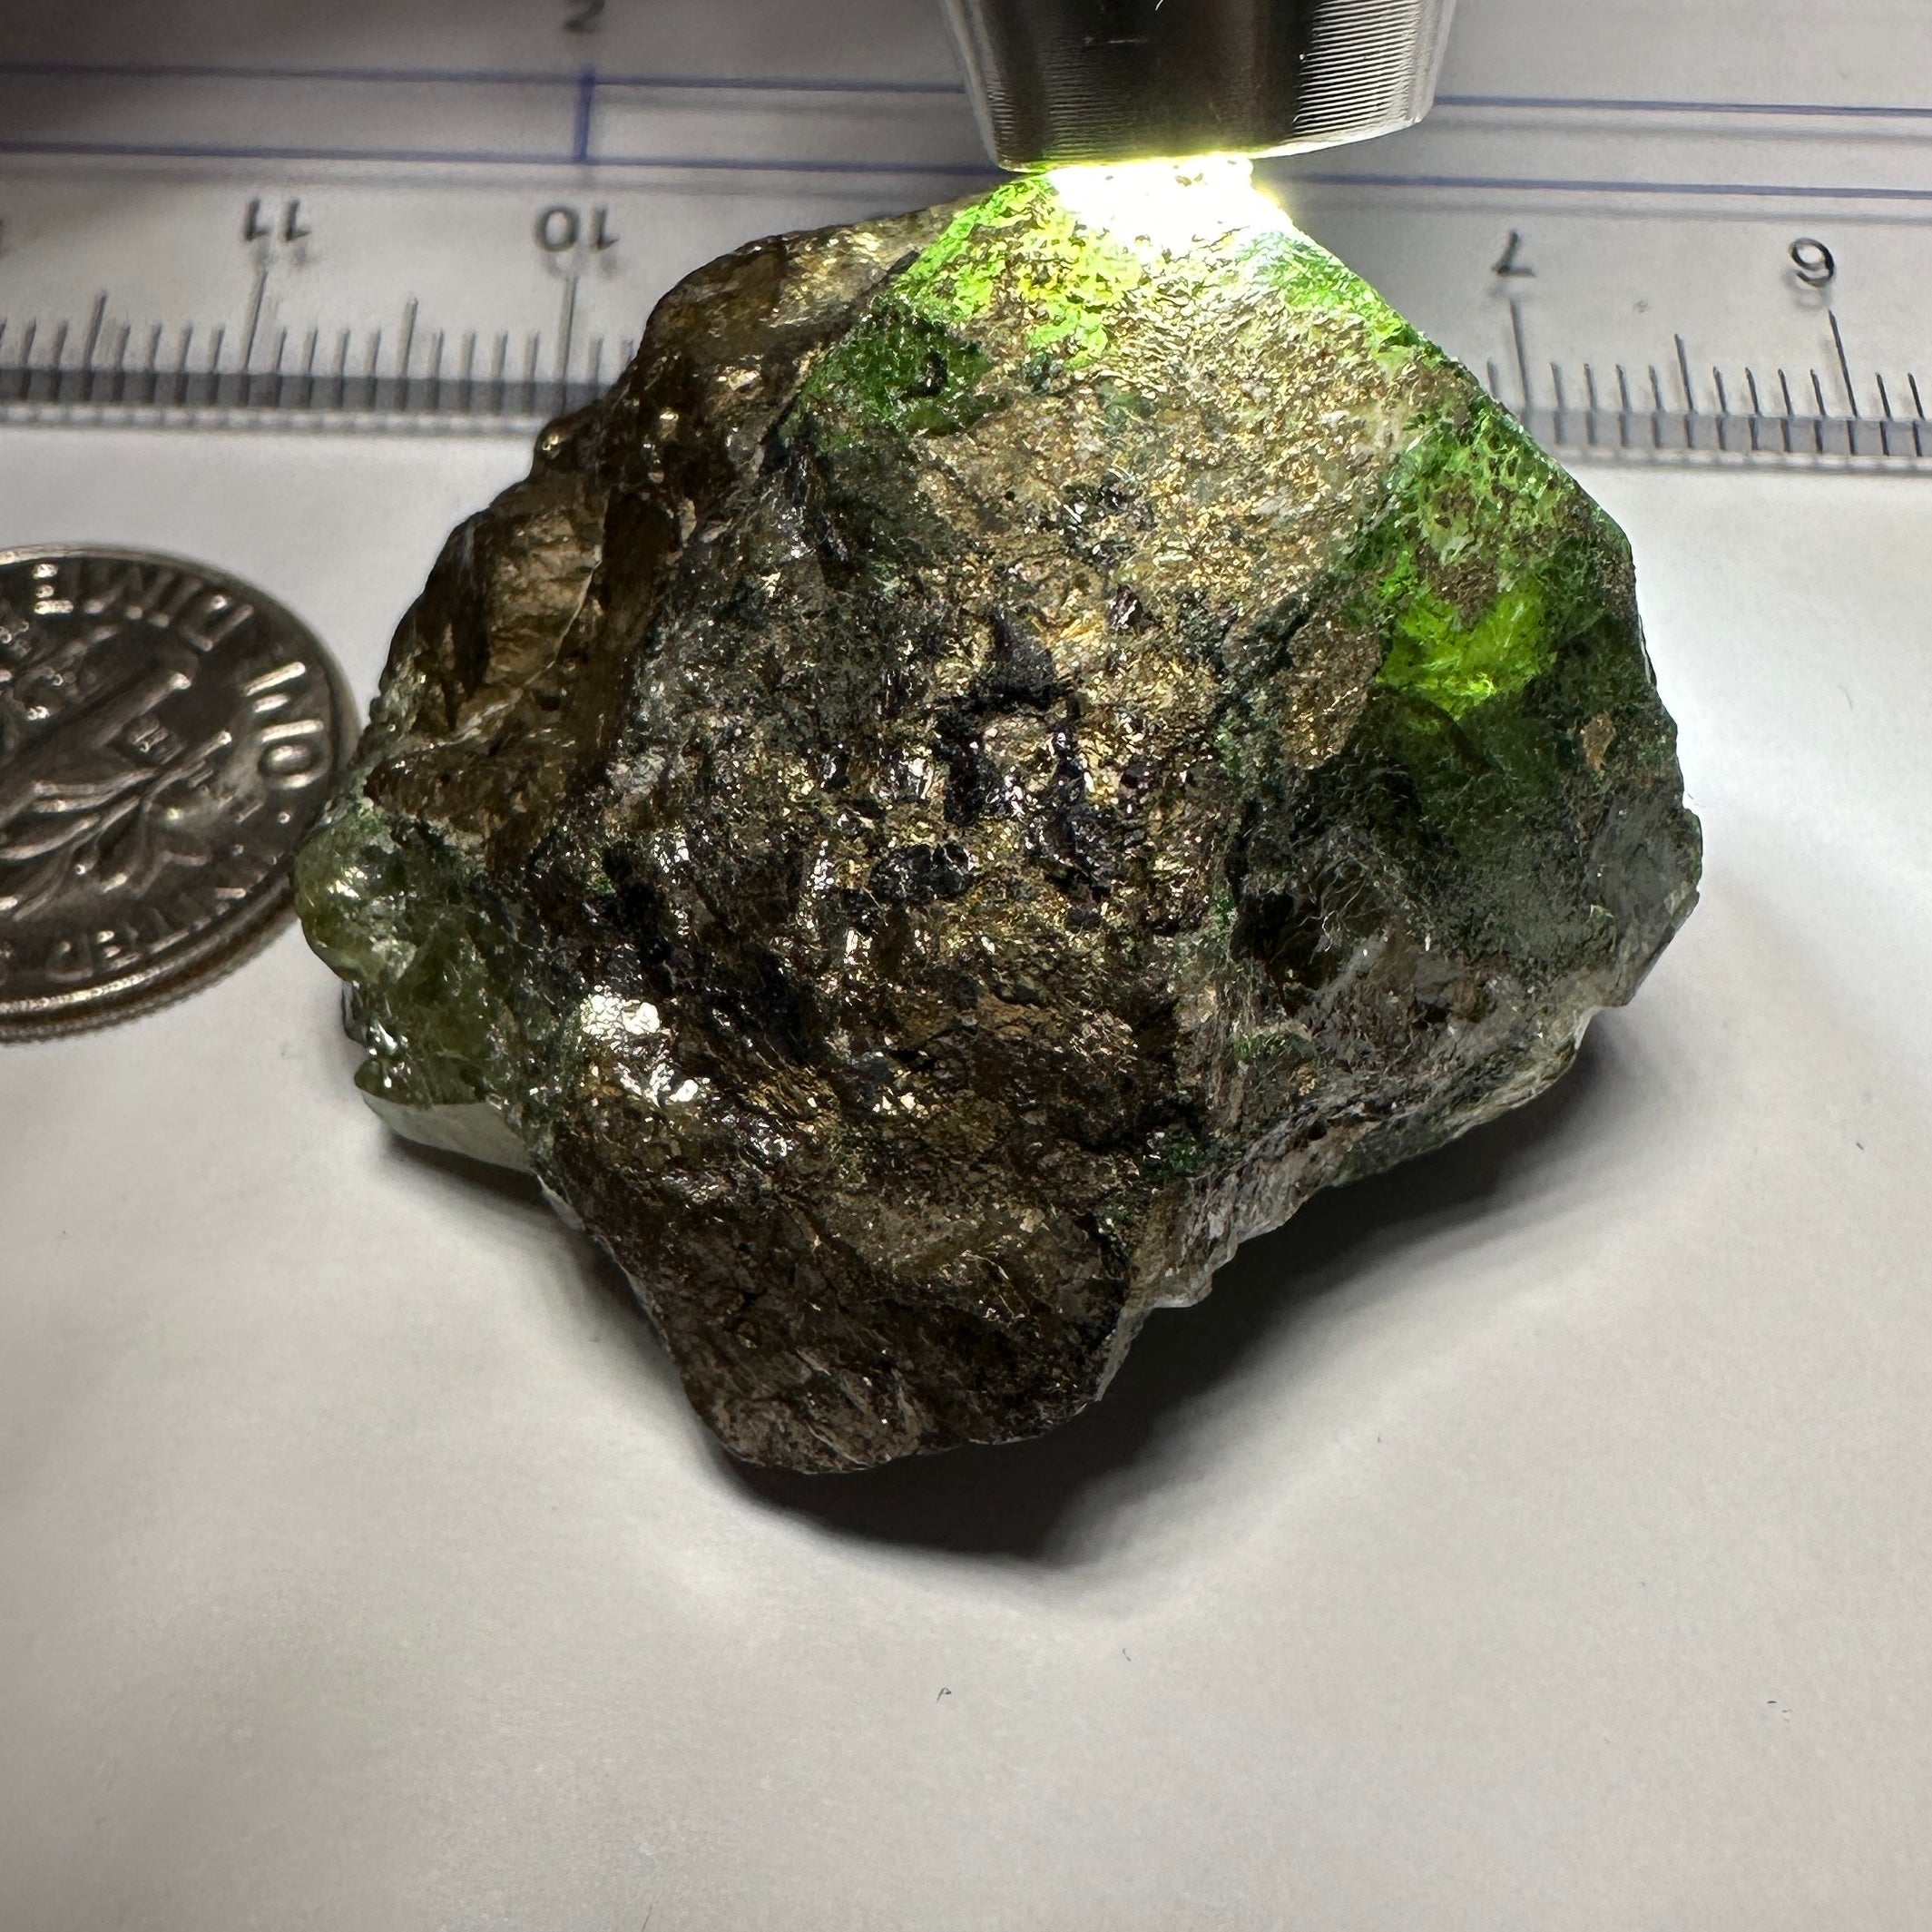 172.96ct / 34.59gm Diopside and Tsavorite with Pyrite on matrix, Mirerani, Tanzania, Untreated Unheated, a fantastic double sided crystal, see video of the other side. 3.35 x 3.26 x 2.09cm